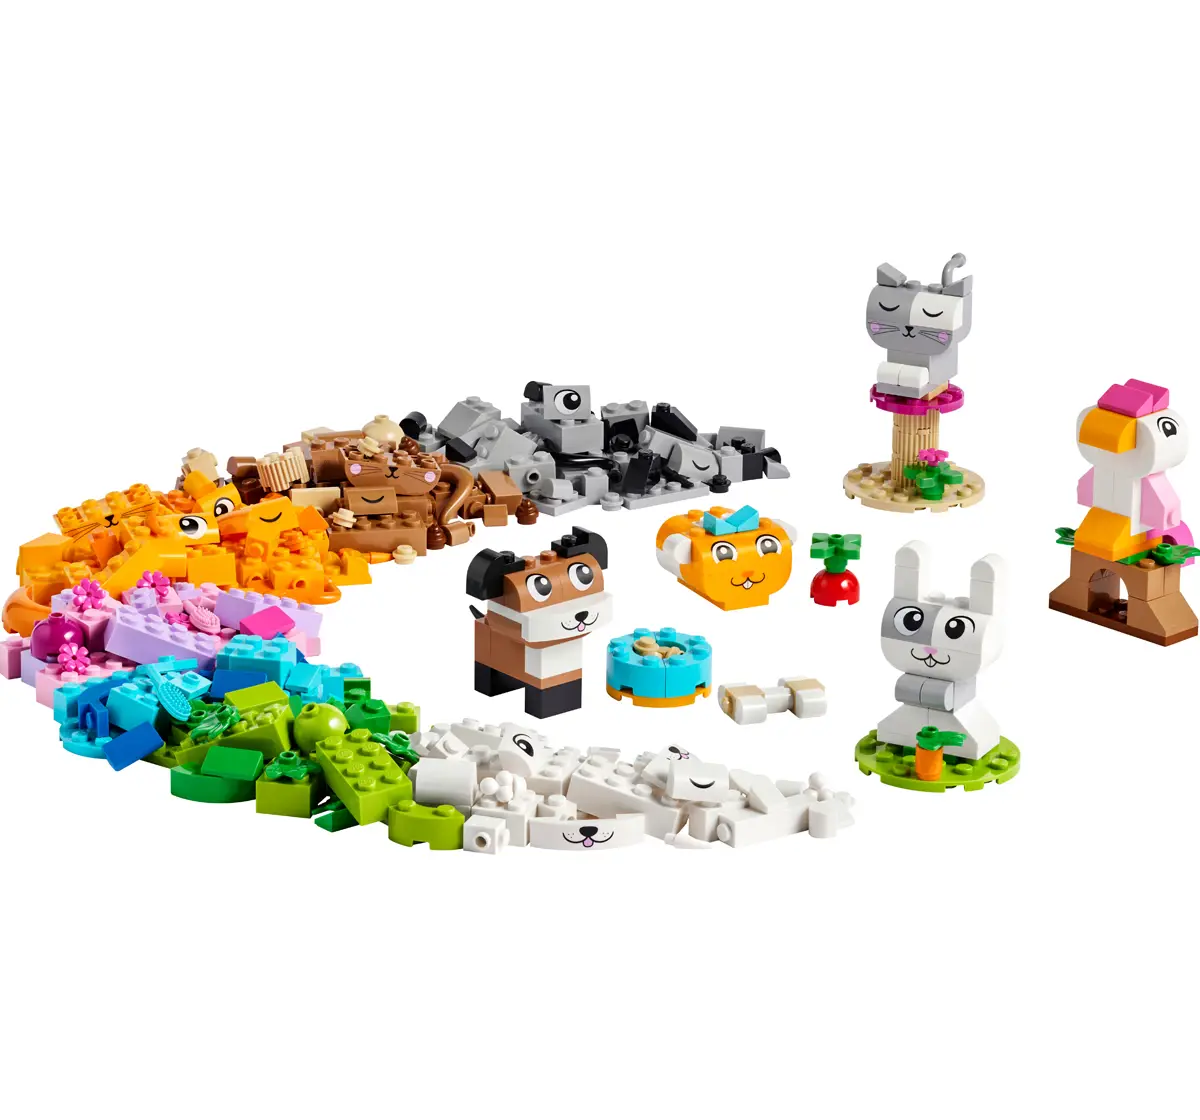 LEGO Classic Creative Pets Buildable Animal Toy 11034 (1212 Pieces)